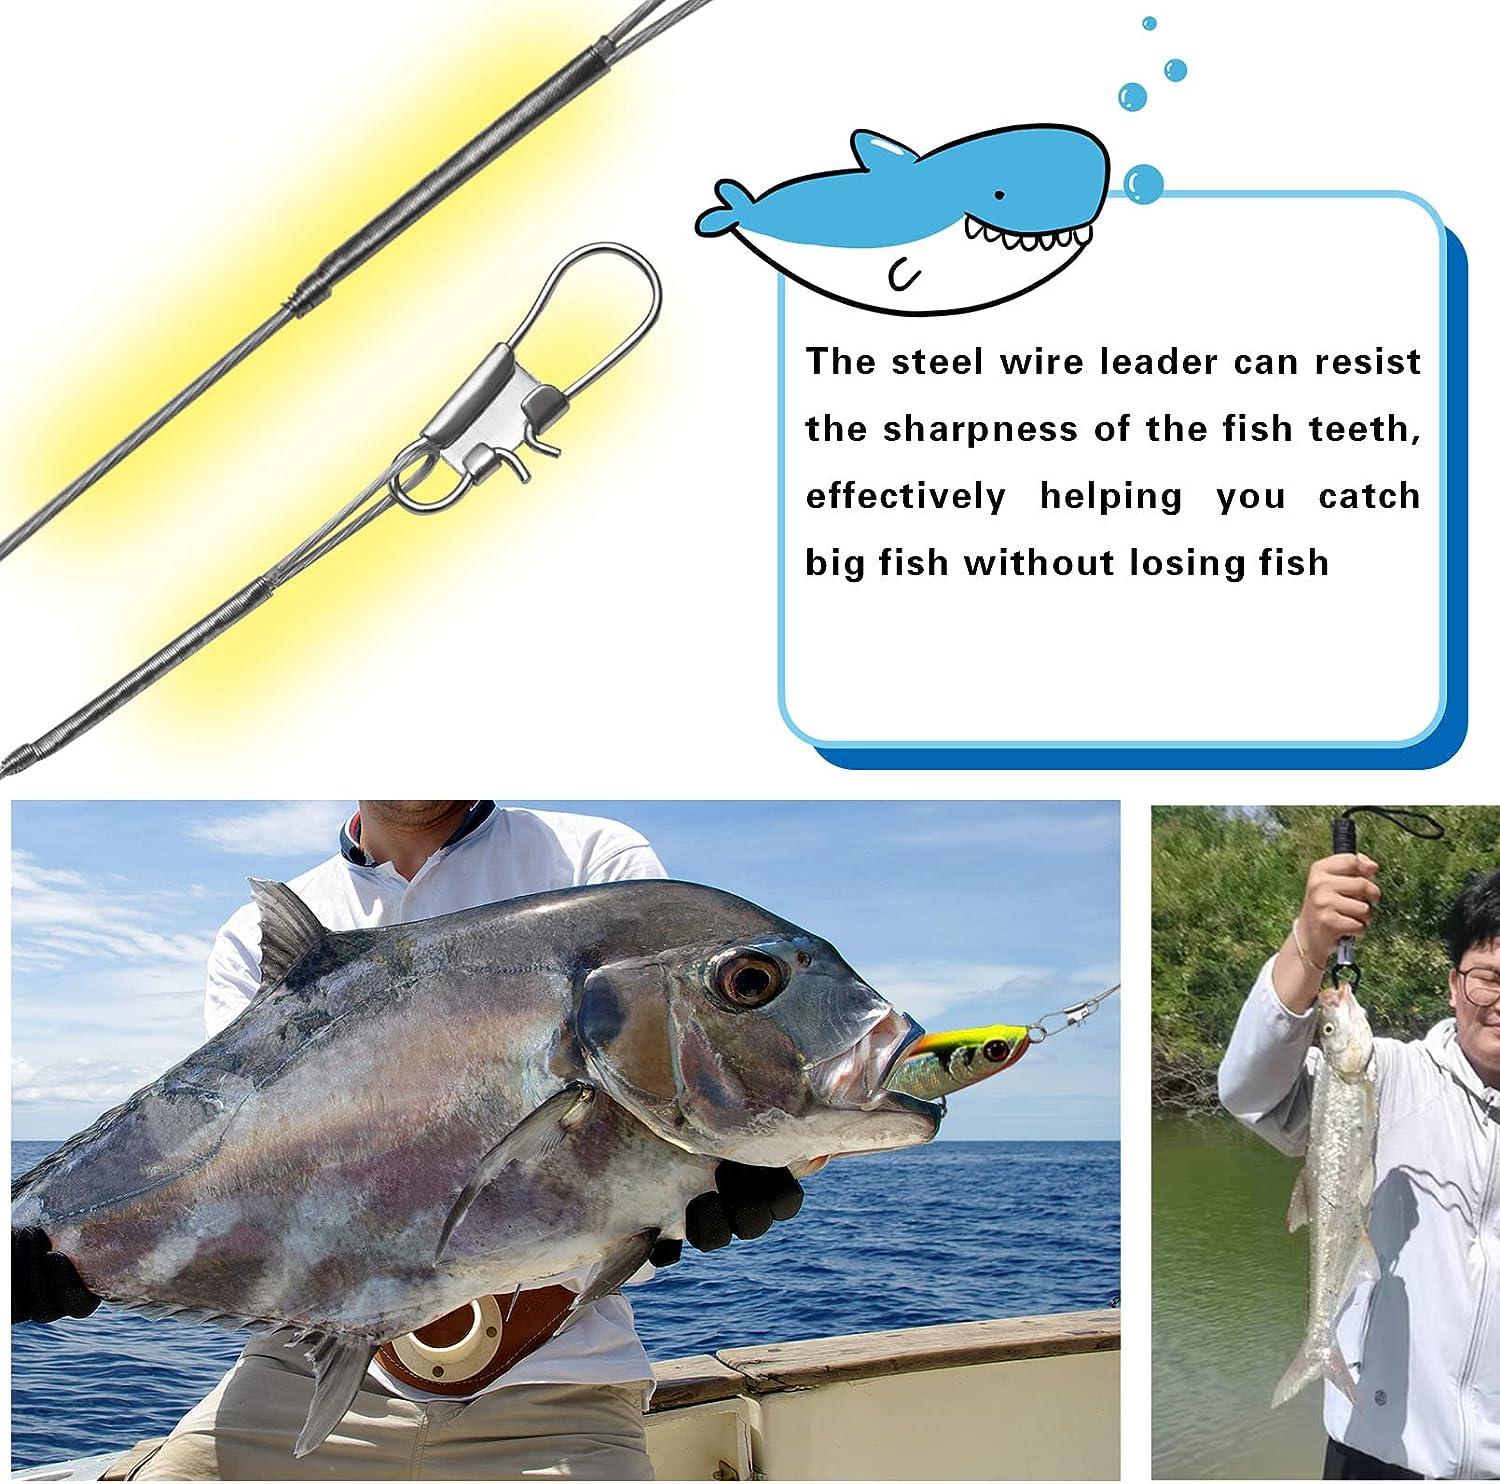 Benykyo Fishing Leader 40 lb High Strength Fishing Leaders with